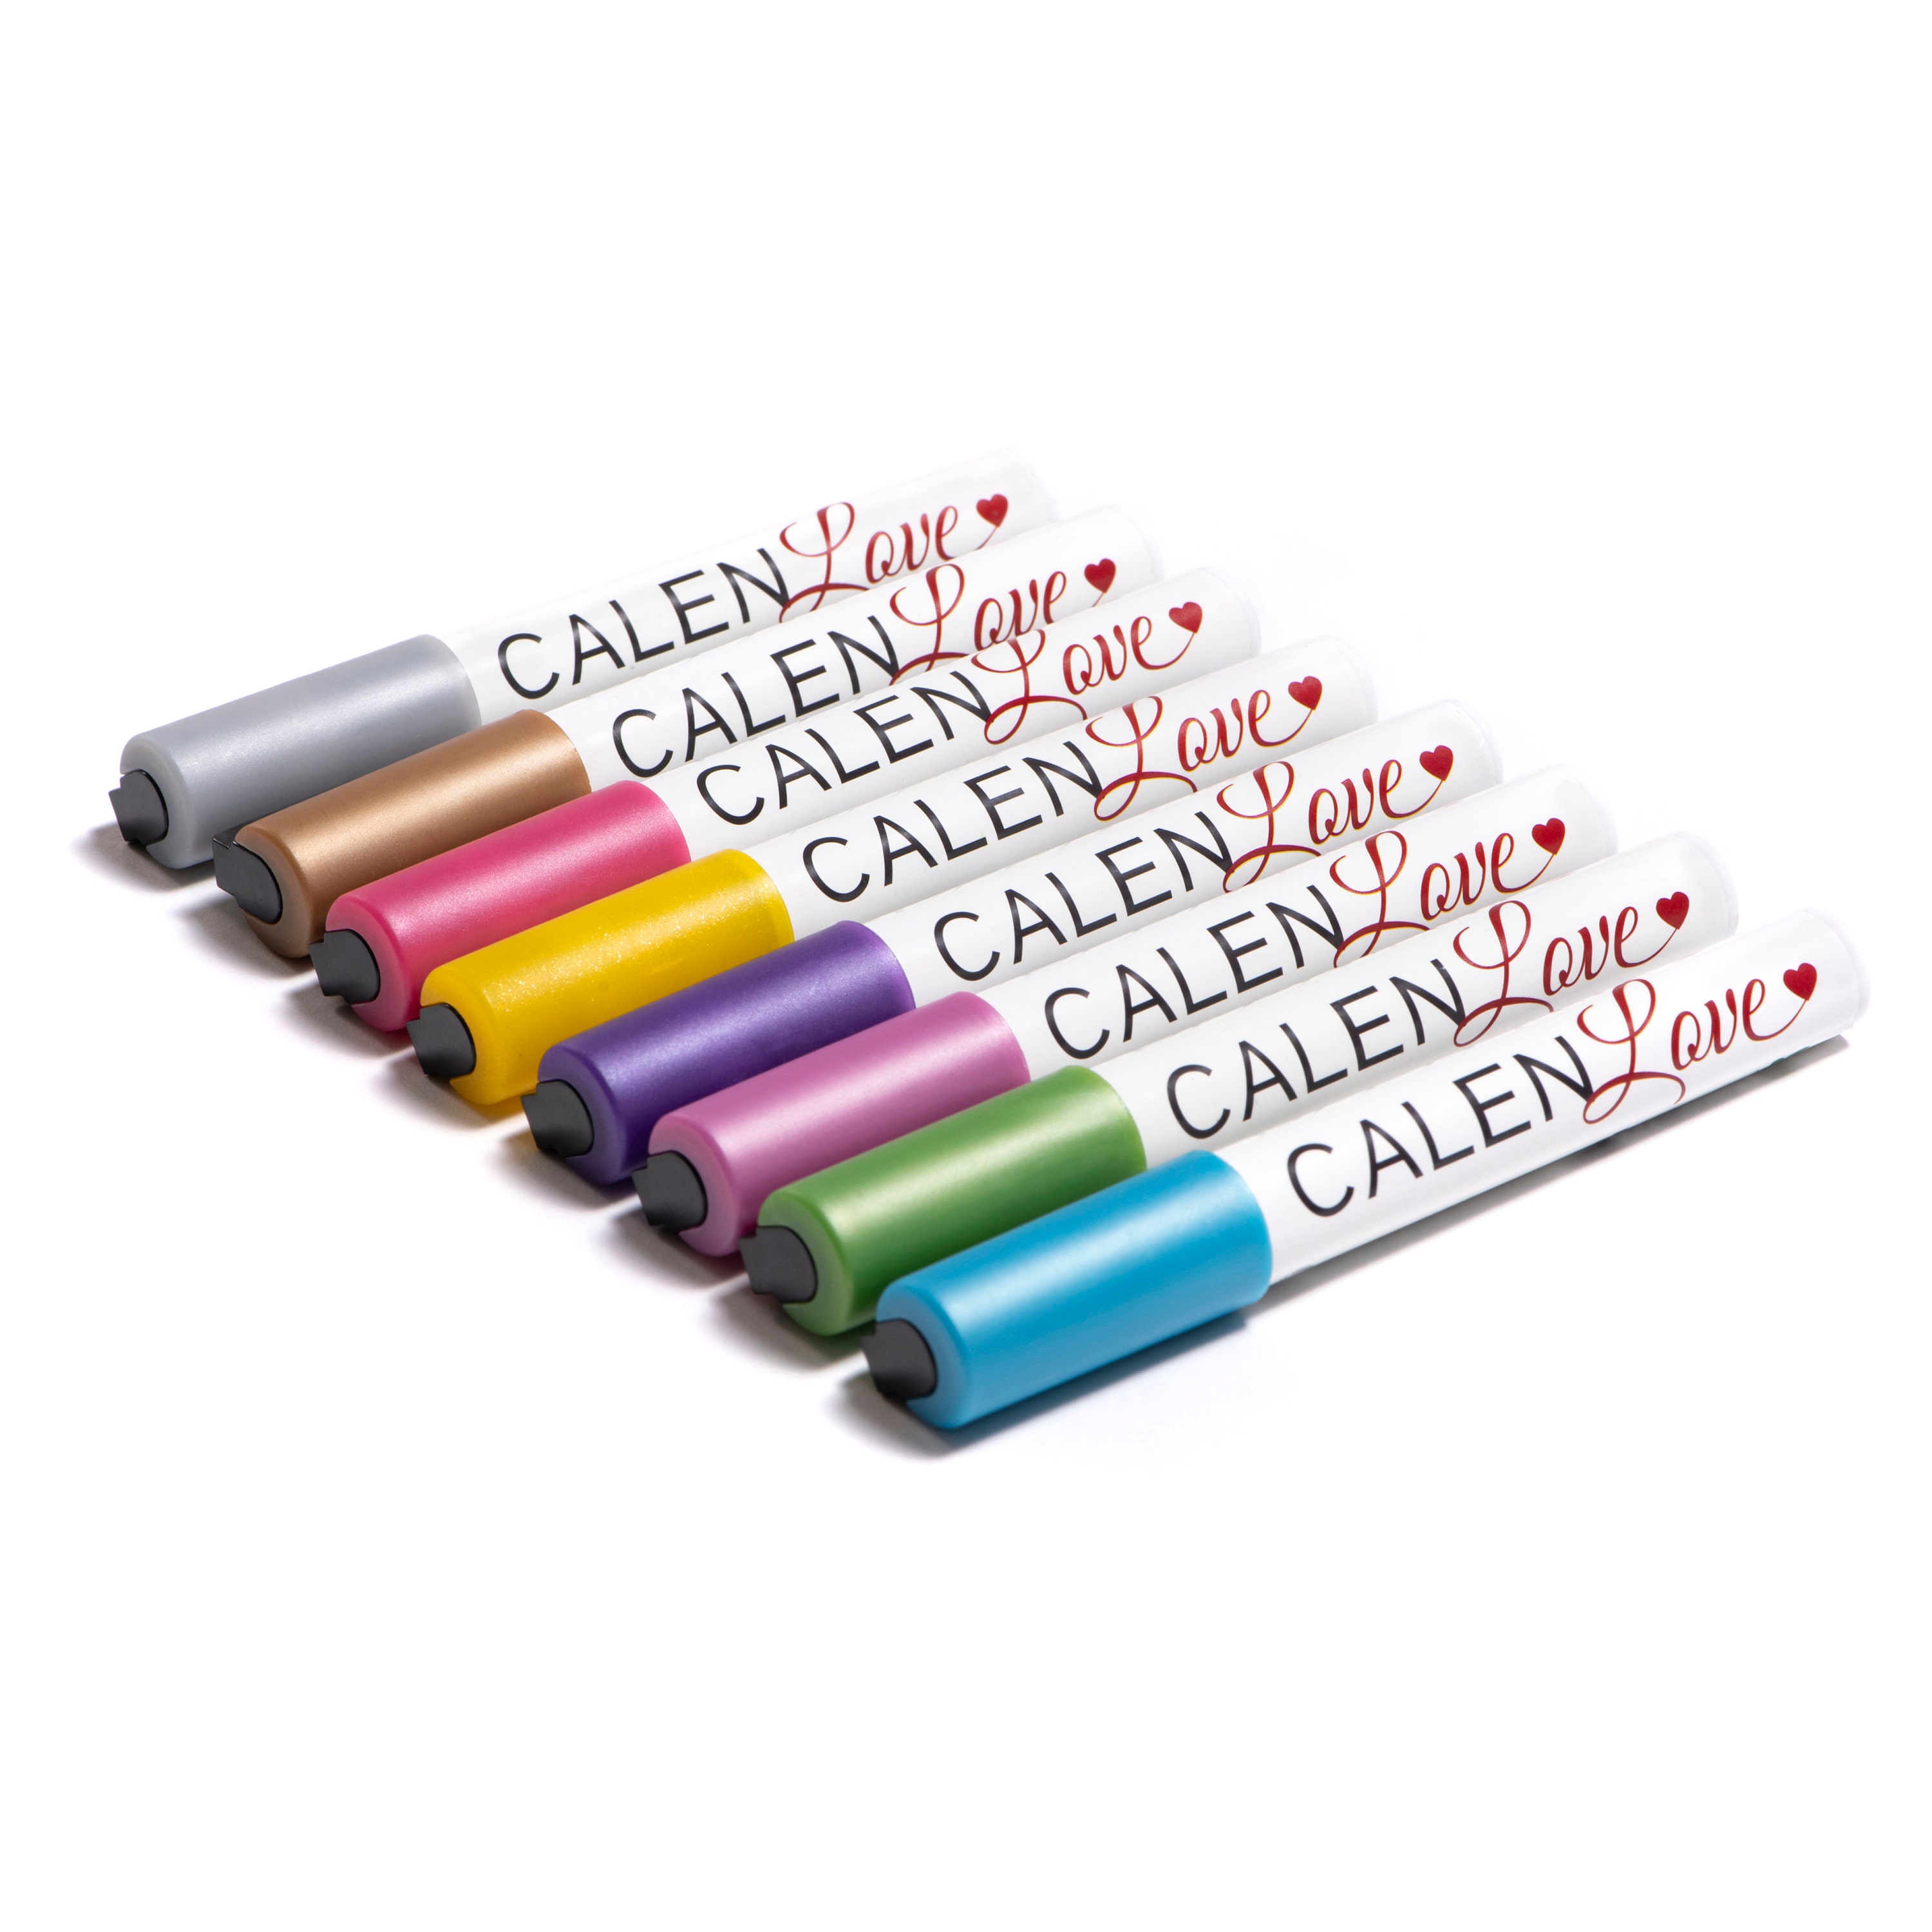 Metallic Marker Pens, Metallic Paint Pen Markers Suitable for Cards Writing  Signature Lettering Metallic Painting Pens - 8